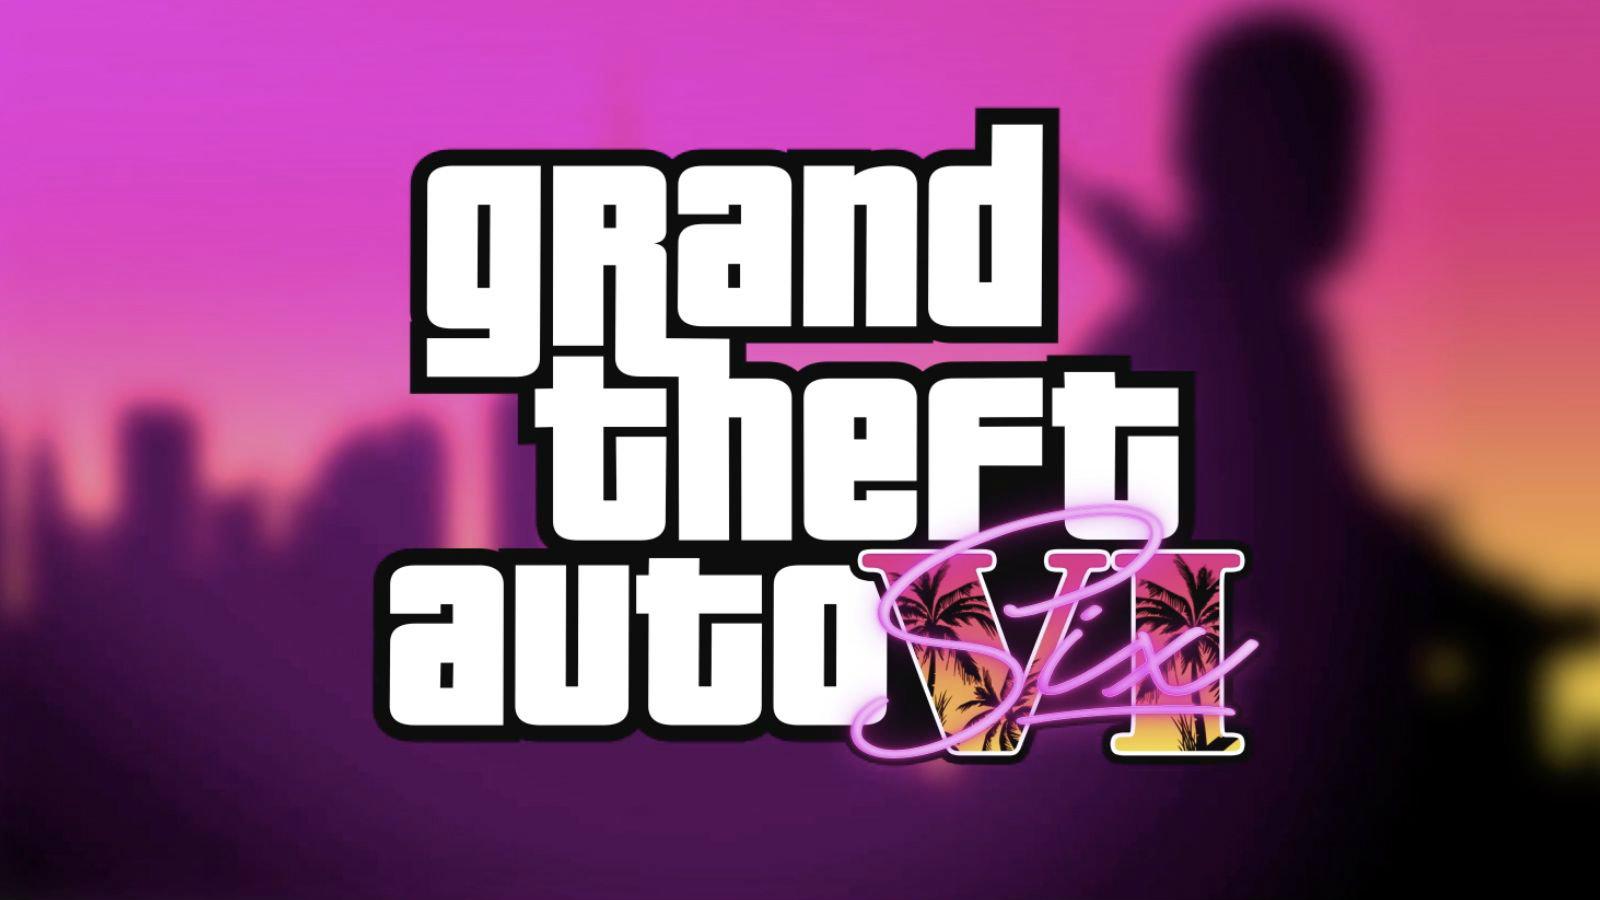 Grand Theft Auto 6 logo with Vice City background